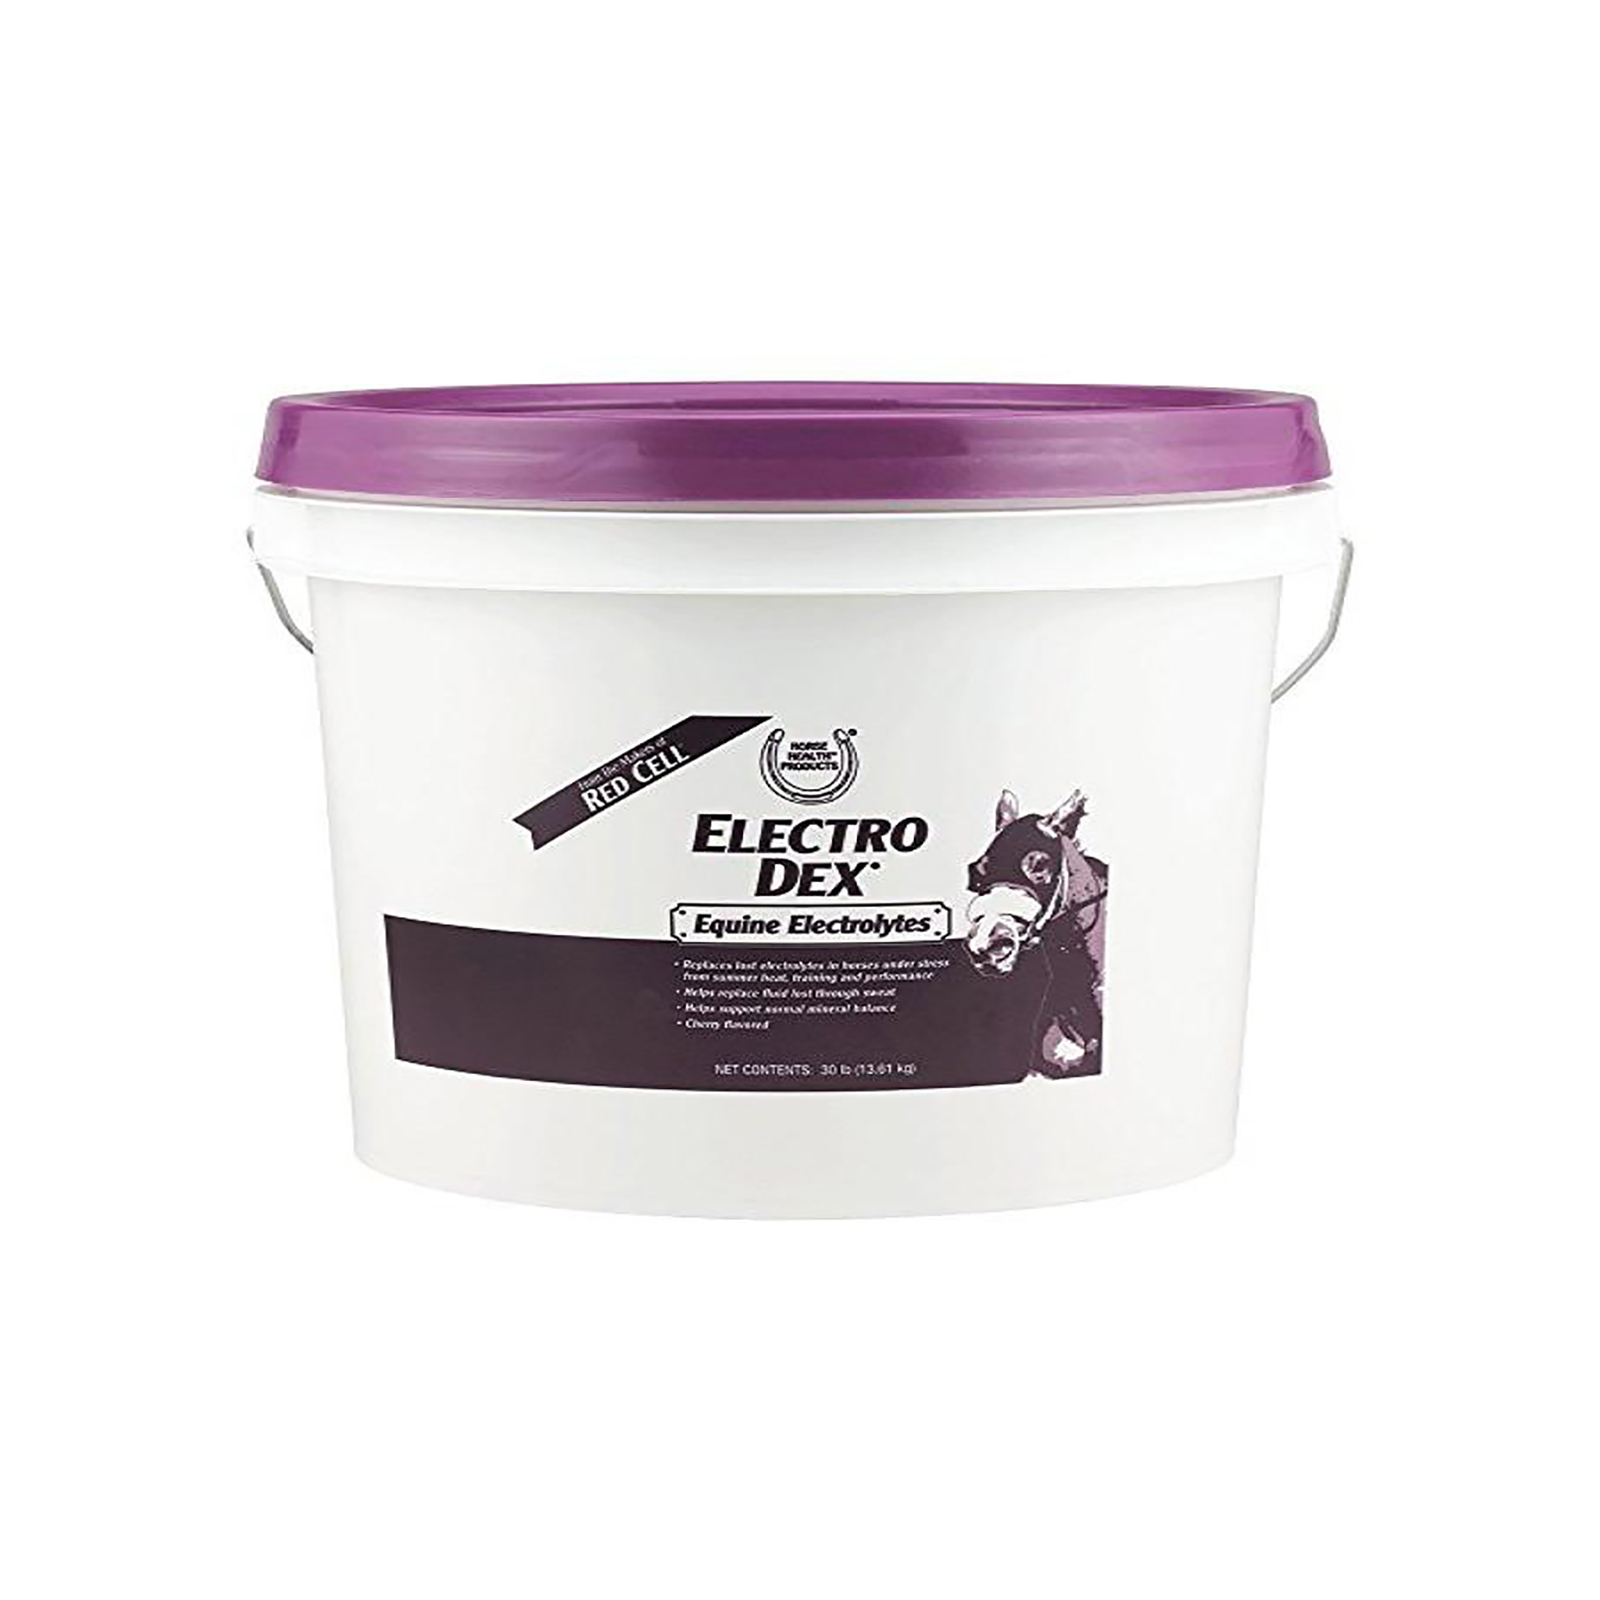 Horse Health 30lb Electro Dex Equine Electrolyte for Horses